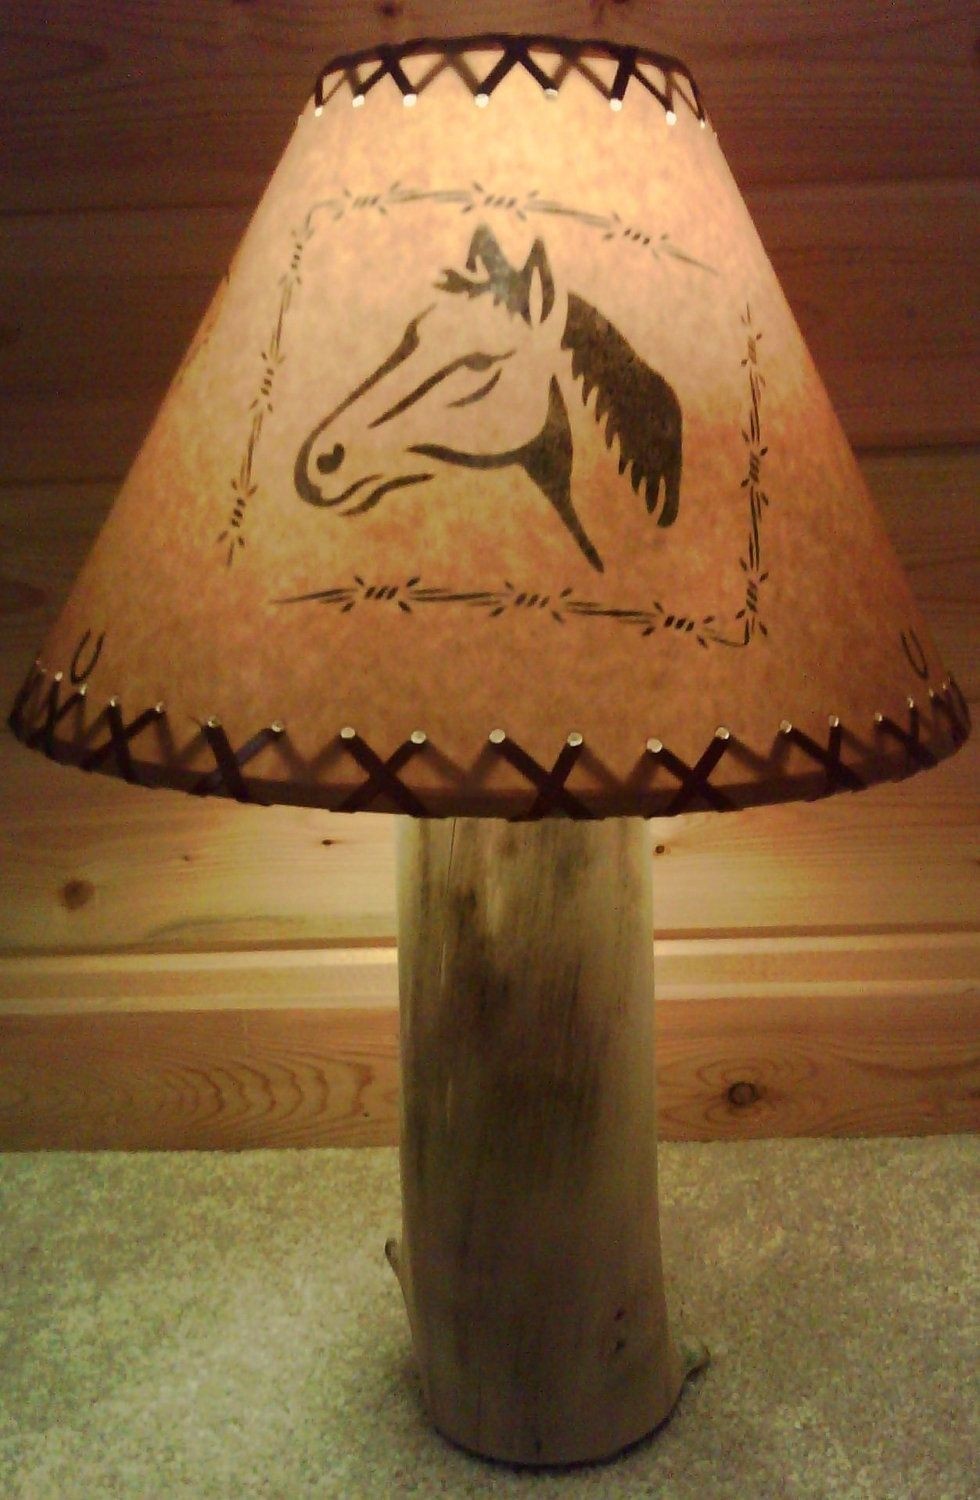 BUFFALO BISON LAMP SHADE RUSTIC PARCHMENT PAPER 12" CLIP ON WESTERN RANCH COWBOY 